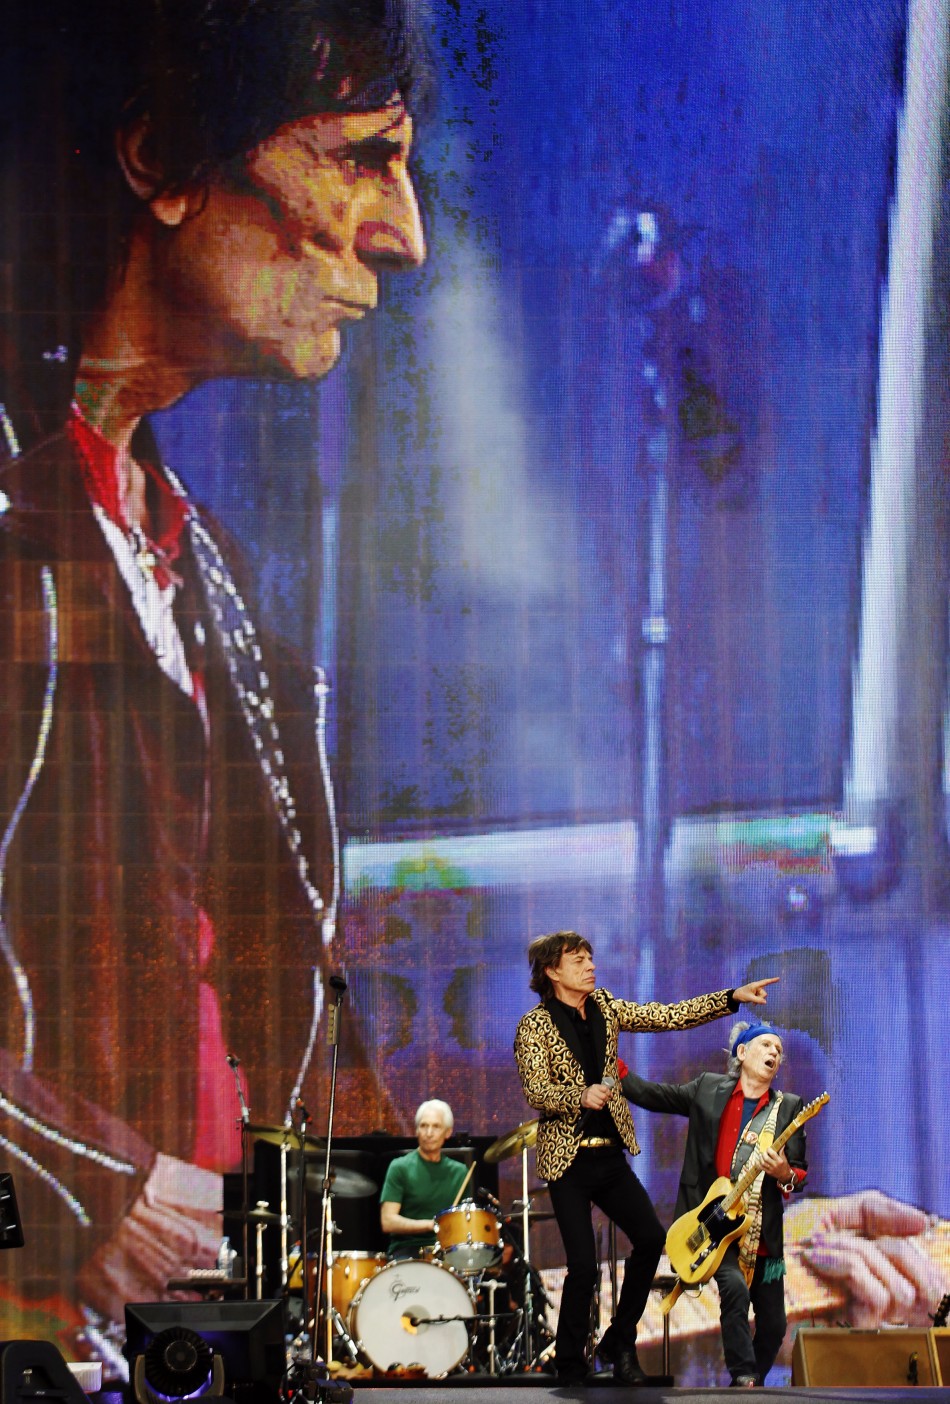 From L to R Ronnie Wood on screen, Charlie Watts, Mick Jagger and Keith Richards